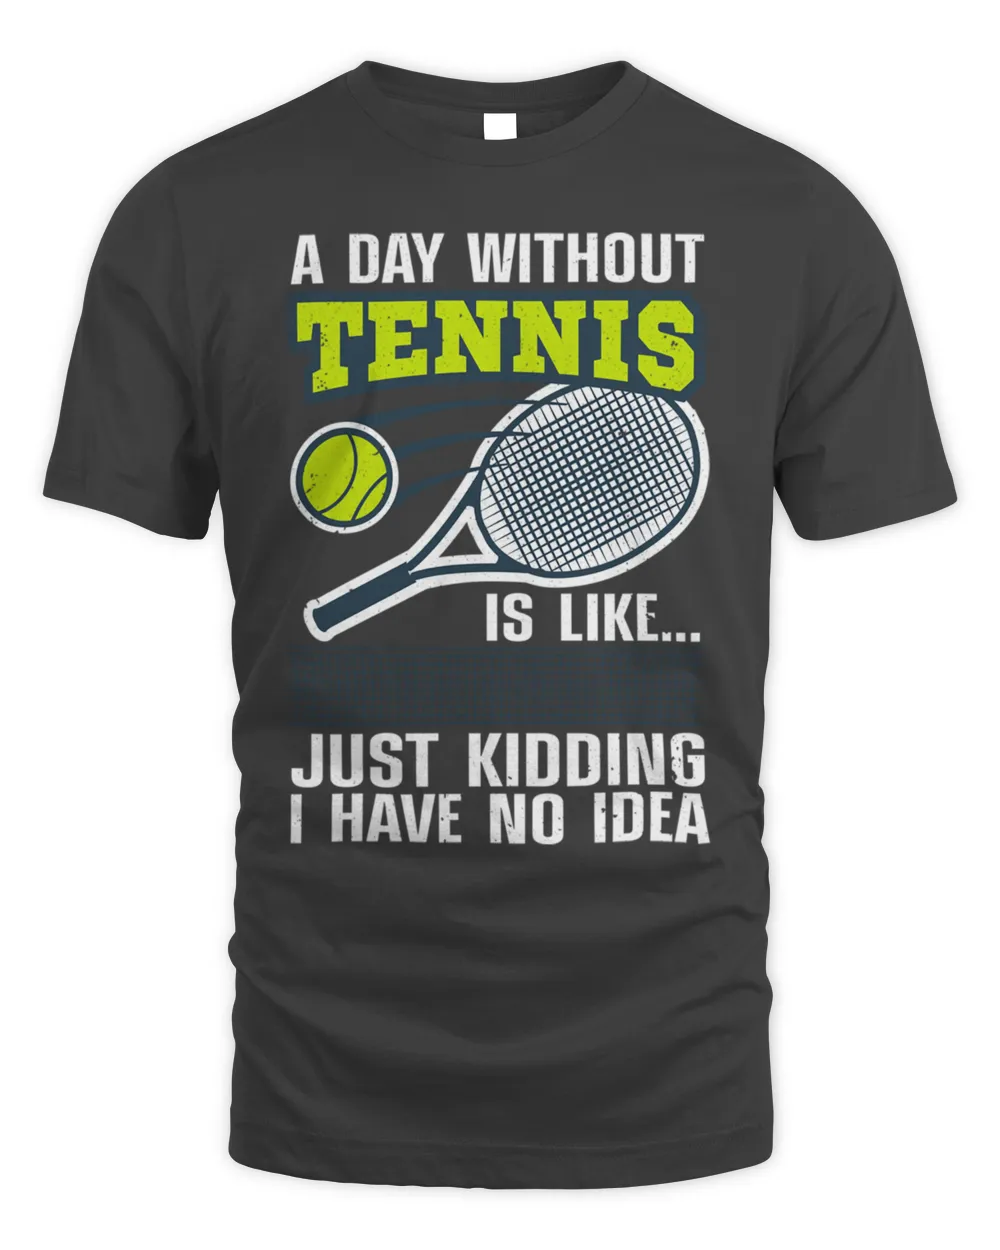 A day without tennis